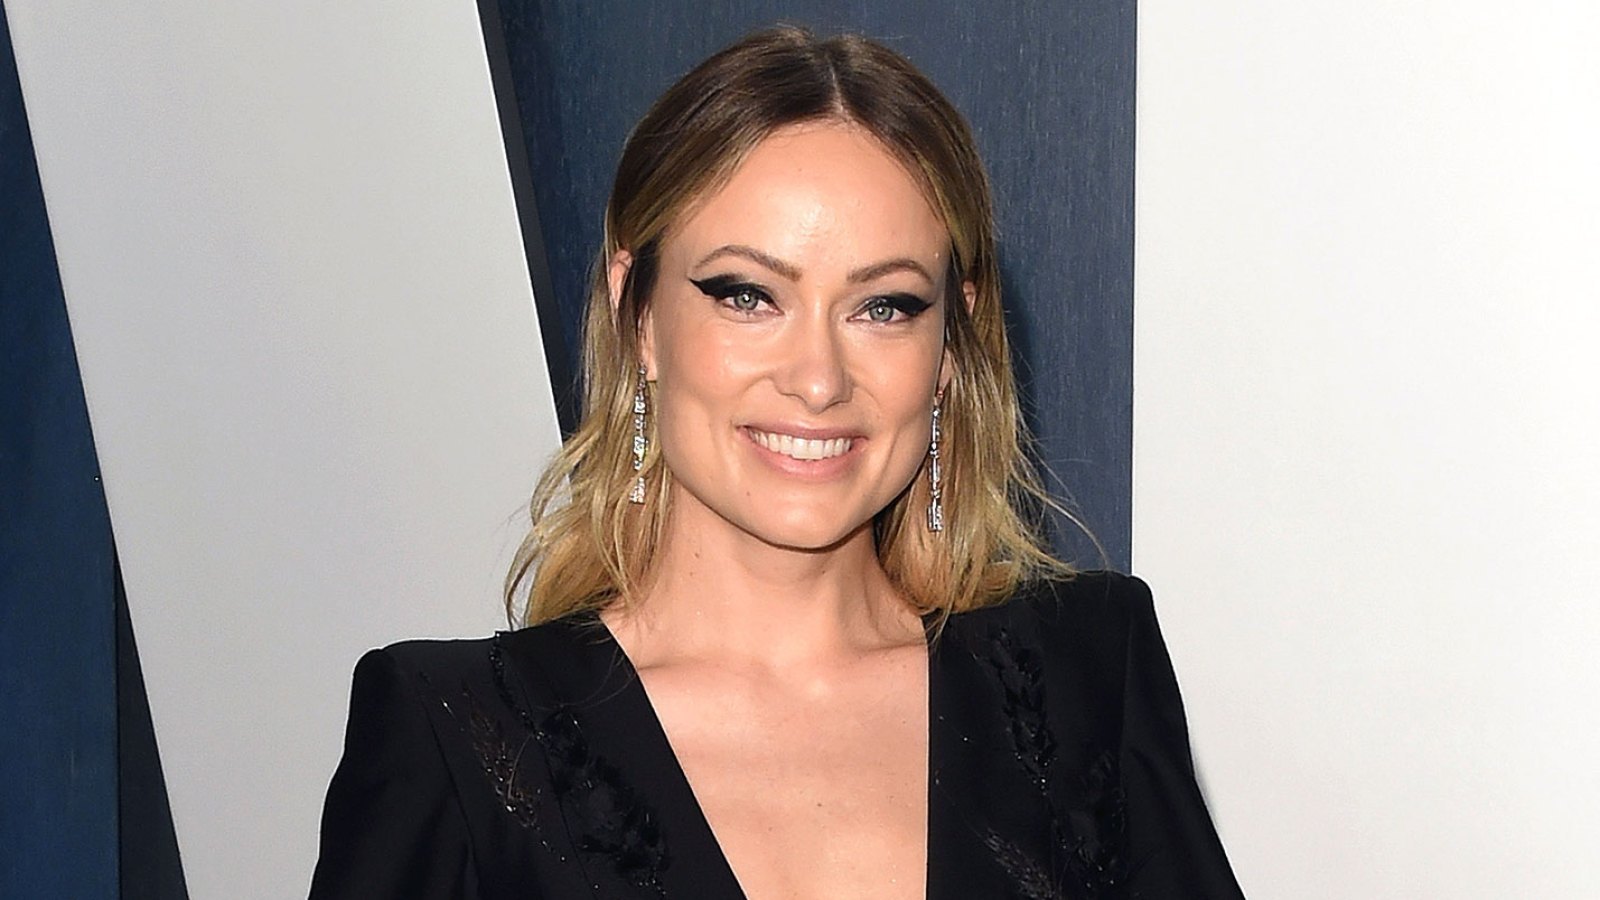 Couple Goals! Olivia Wilde Supports BF Harry Styles in ‘Love On Tour’ Merch in Los Angeles